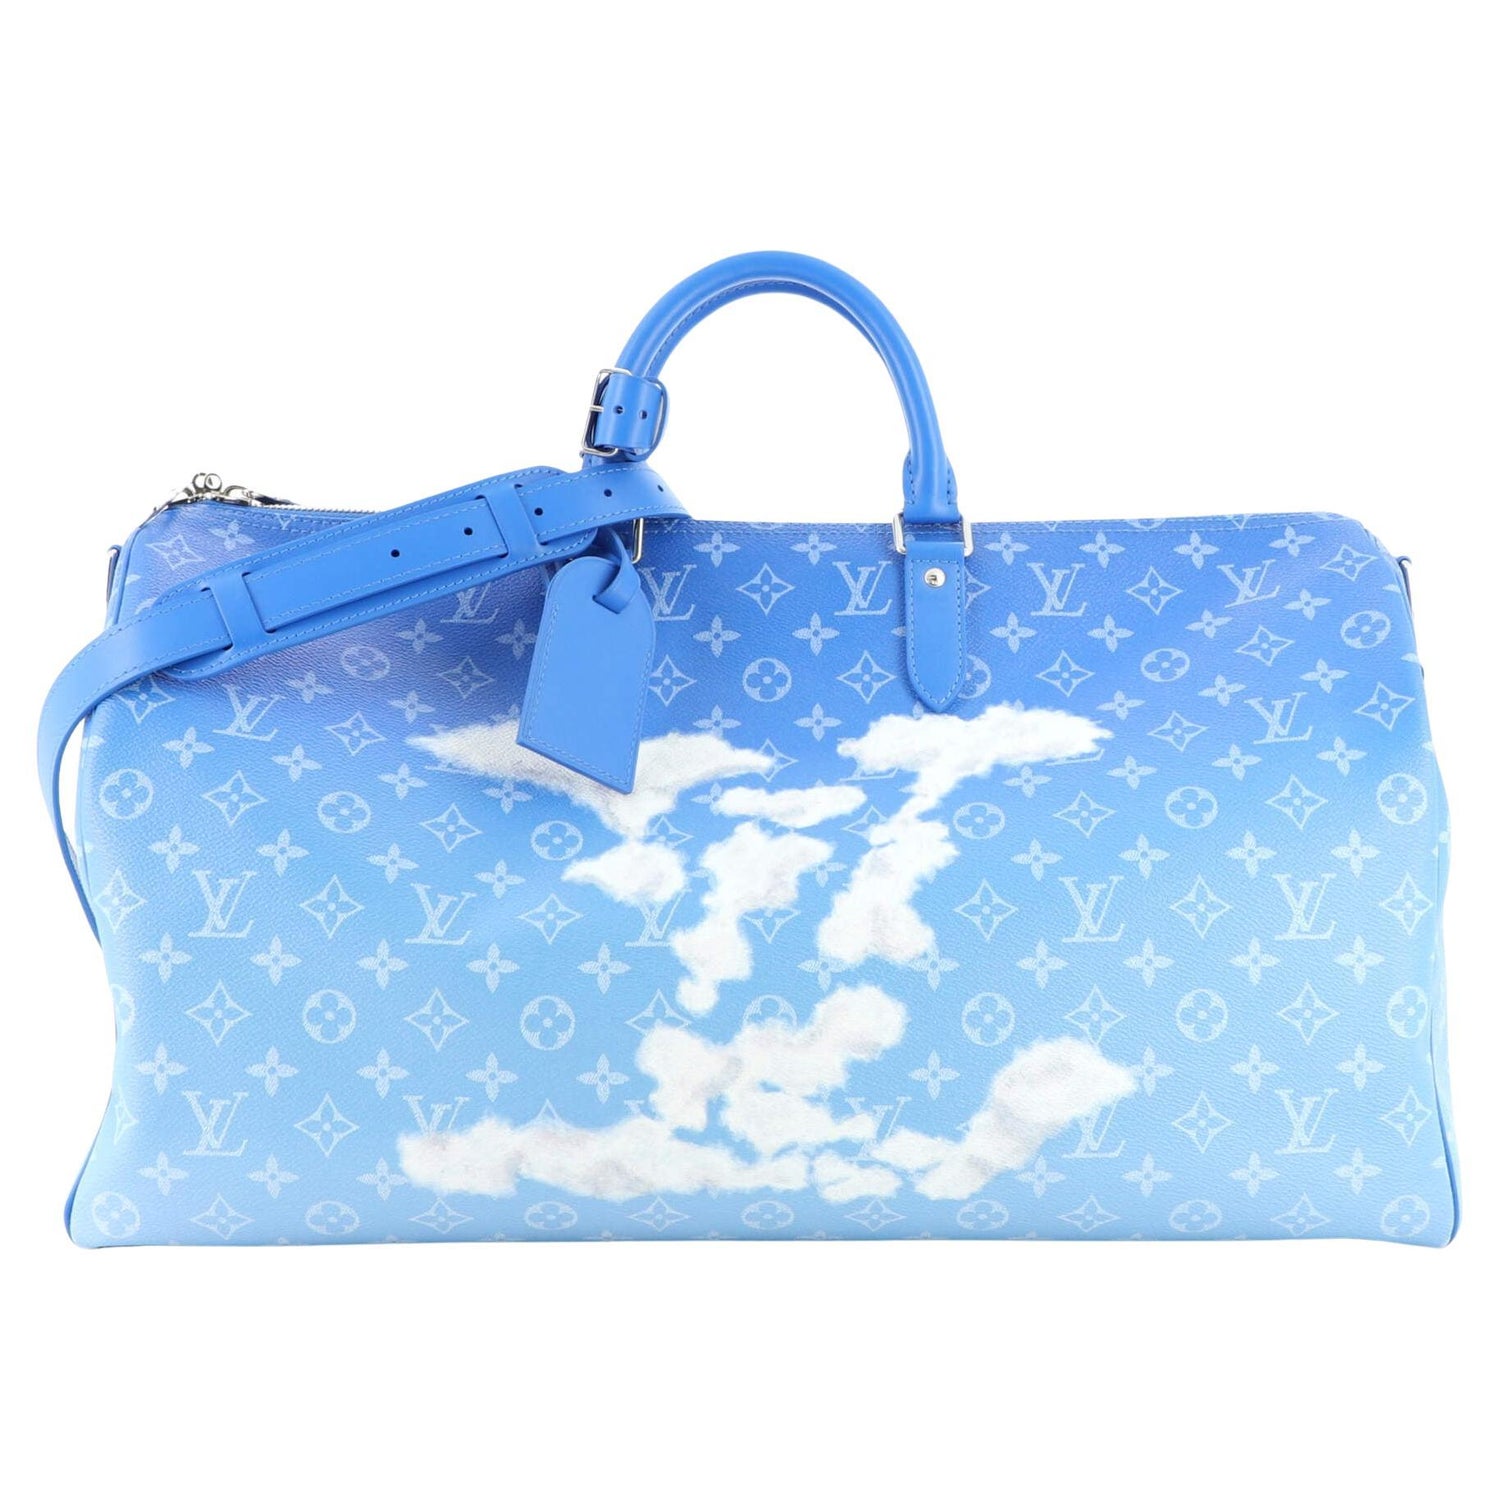 Your Shopper is HIGH - LV Keepall Bandouliere Clouds Price